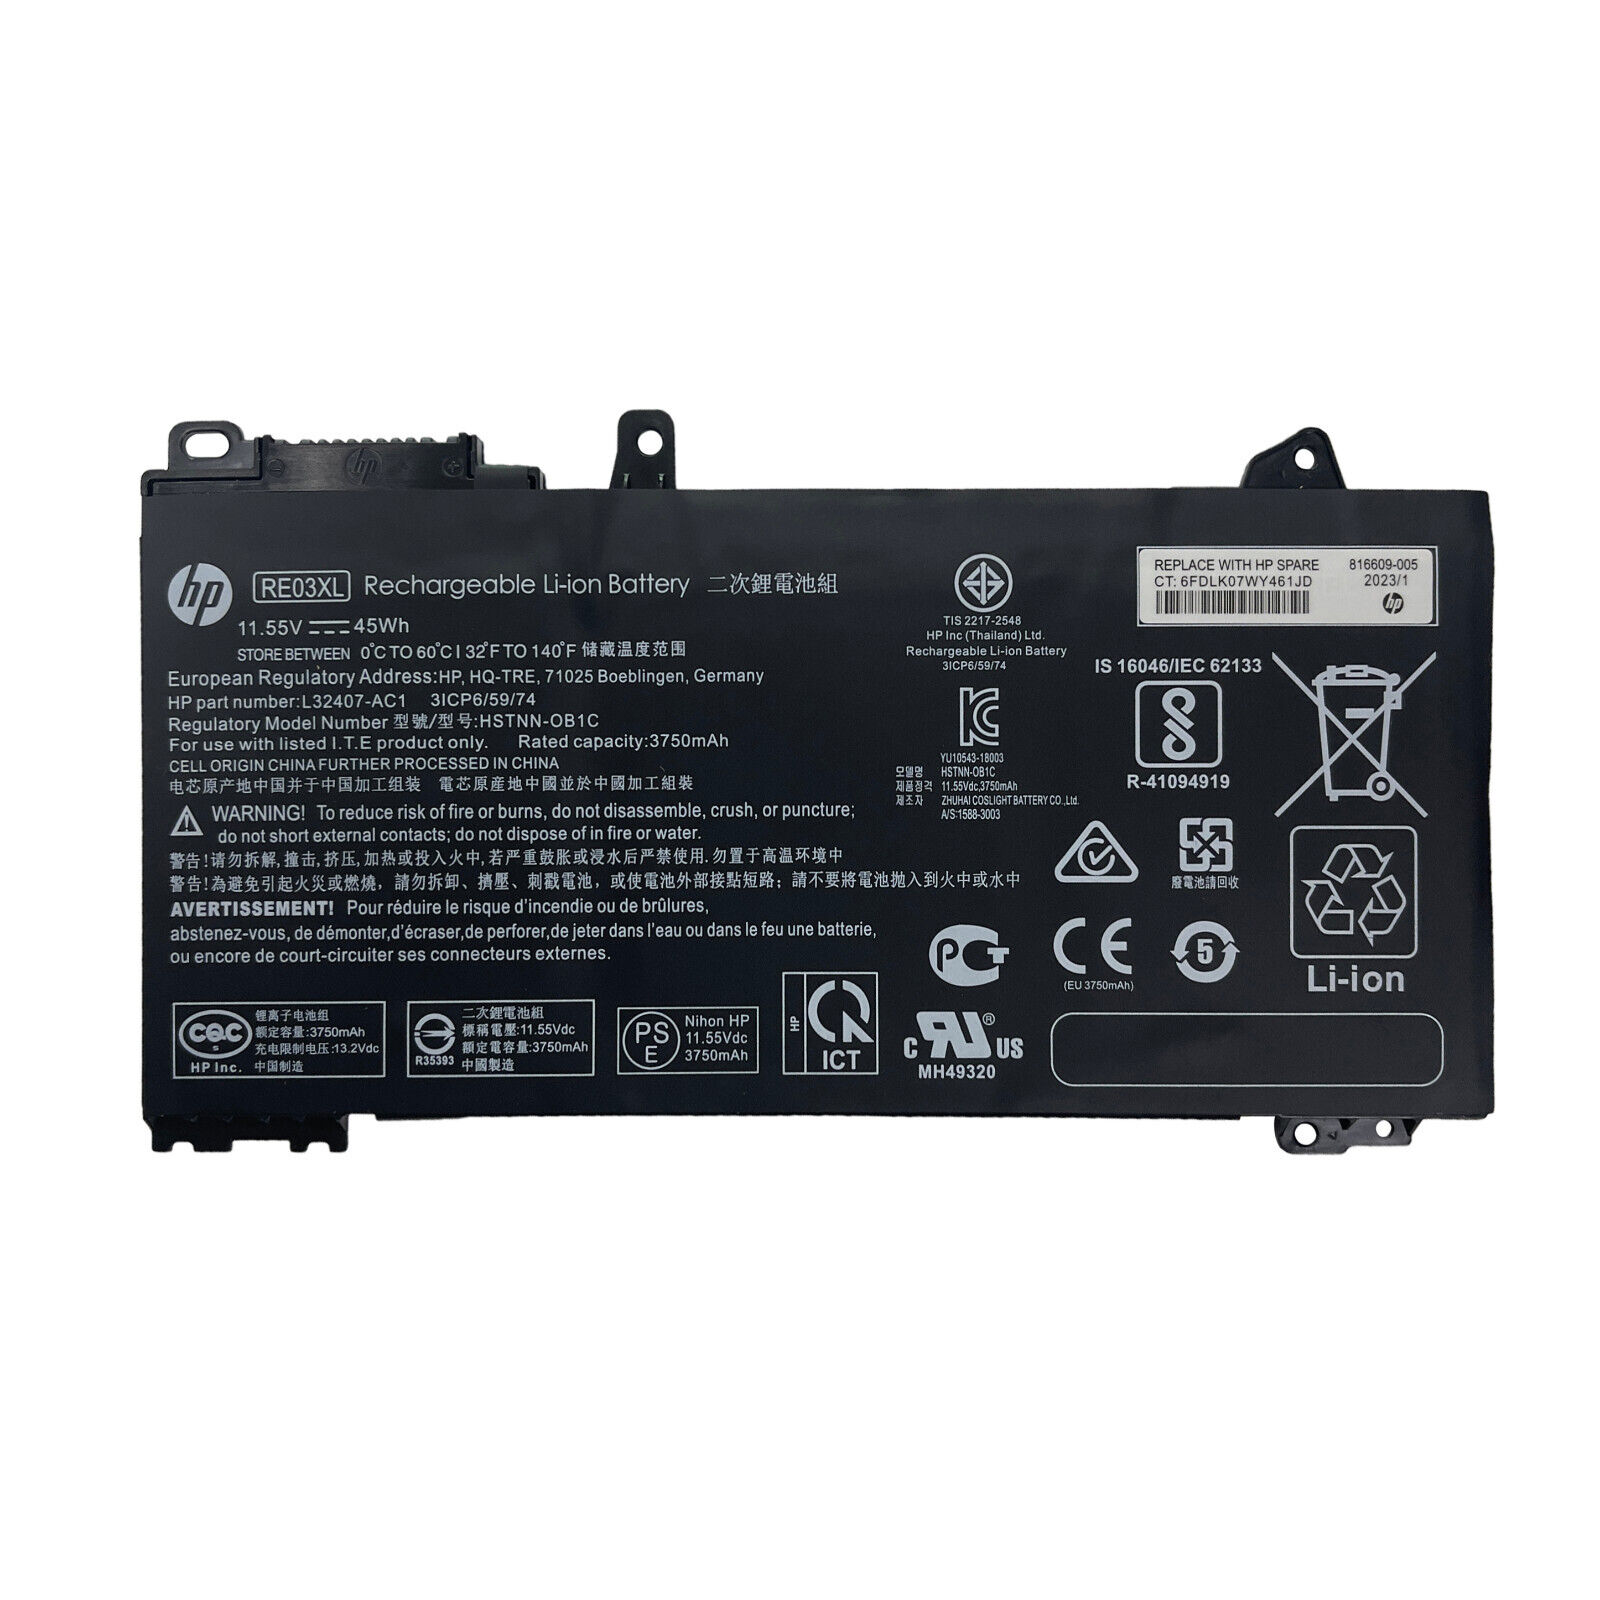 NEW Genuine 45Wh 11.55V RE03XL Battery for HP ProBook 430 440 445 450 455R G6